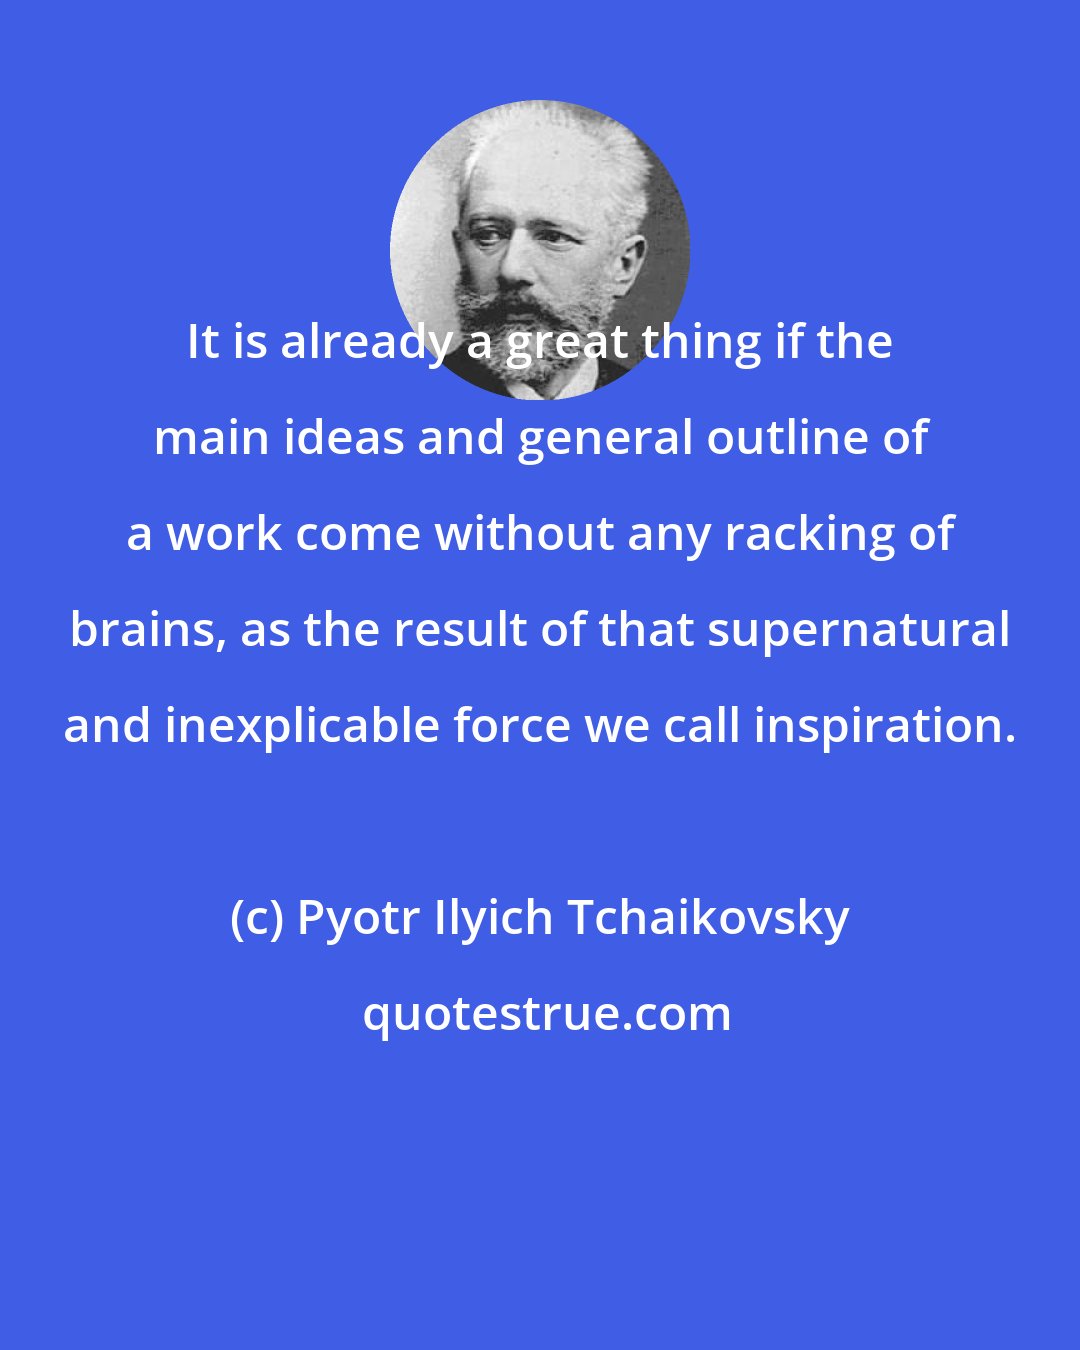 Pyotr Ilyich Tchaikovsky: It is already a great thing if the main ideas and general outline of a work come without any racking of brains, as the result of that supernatural and inexplicable force we call inspiration.